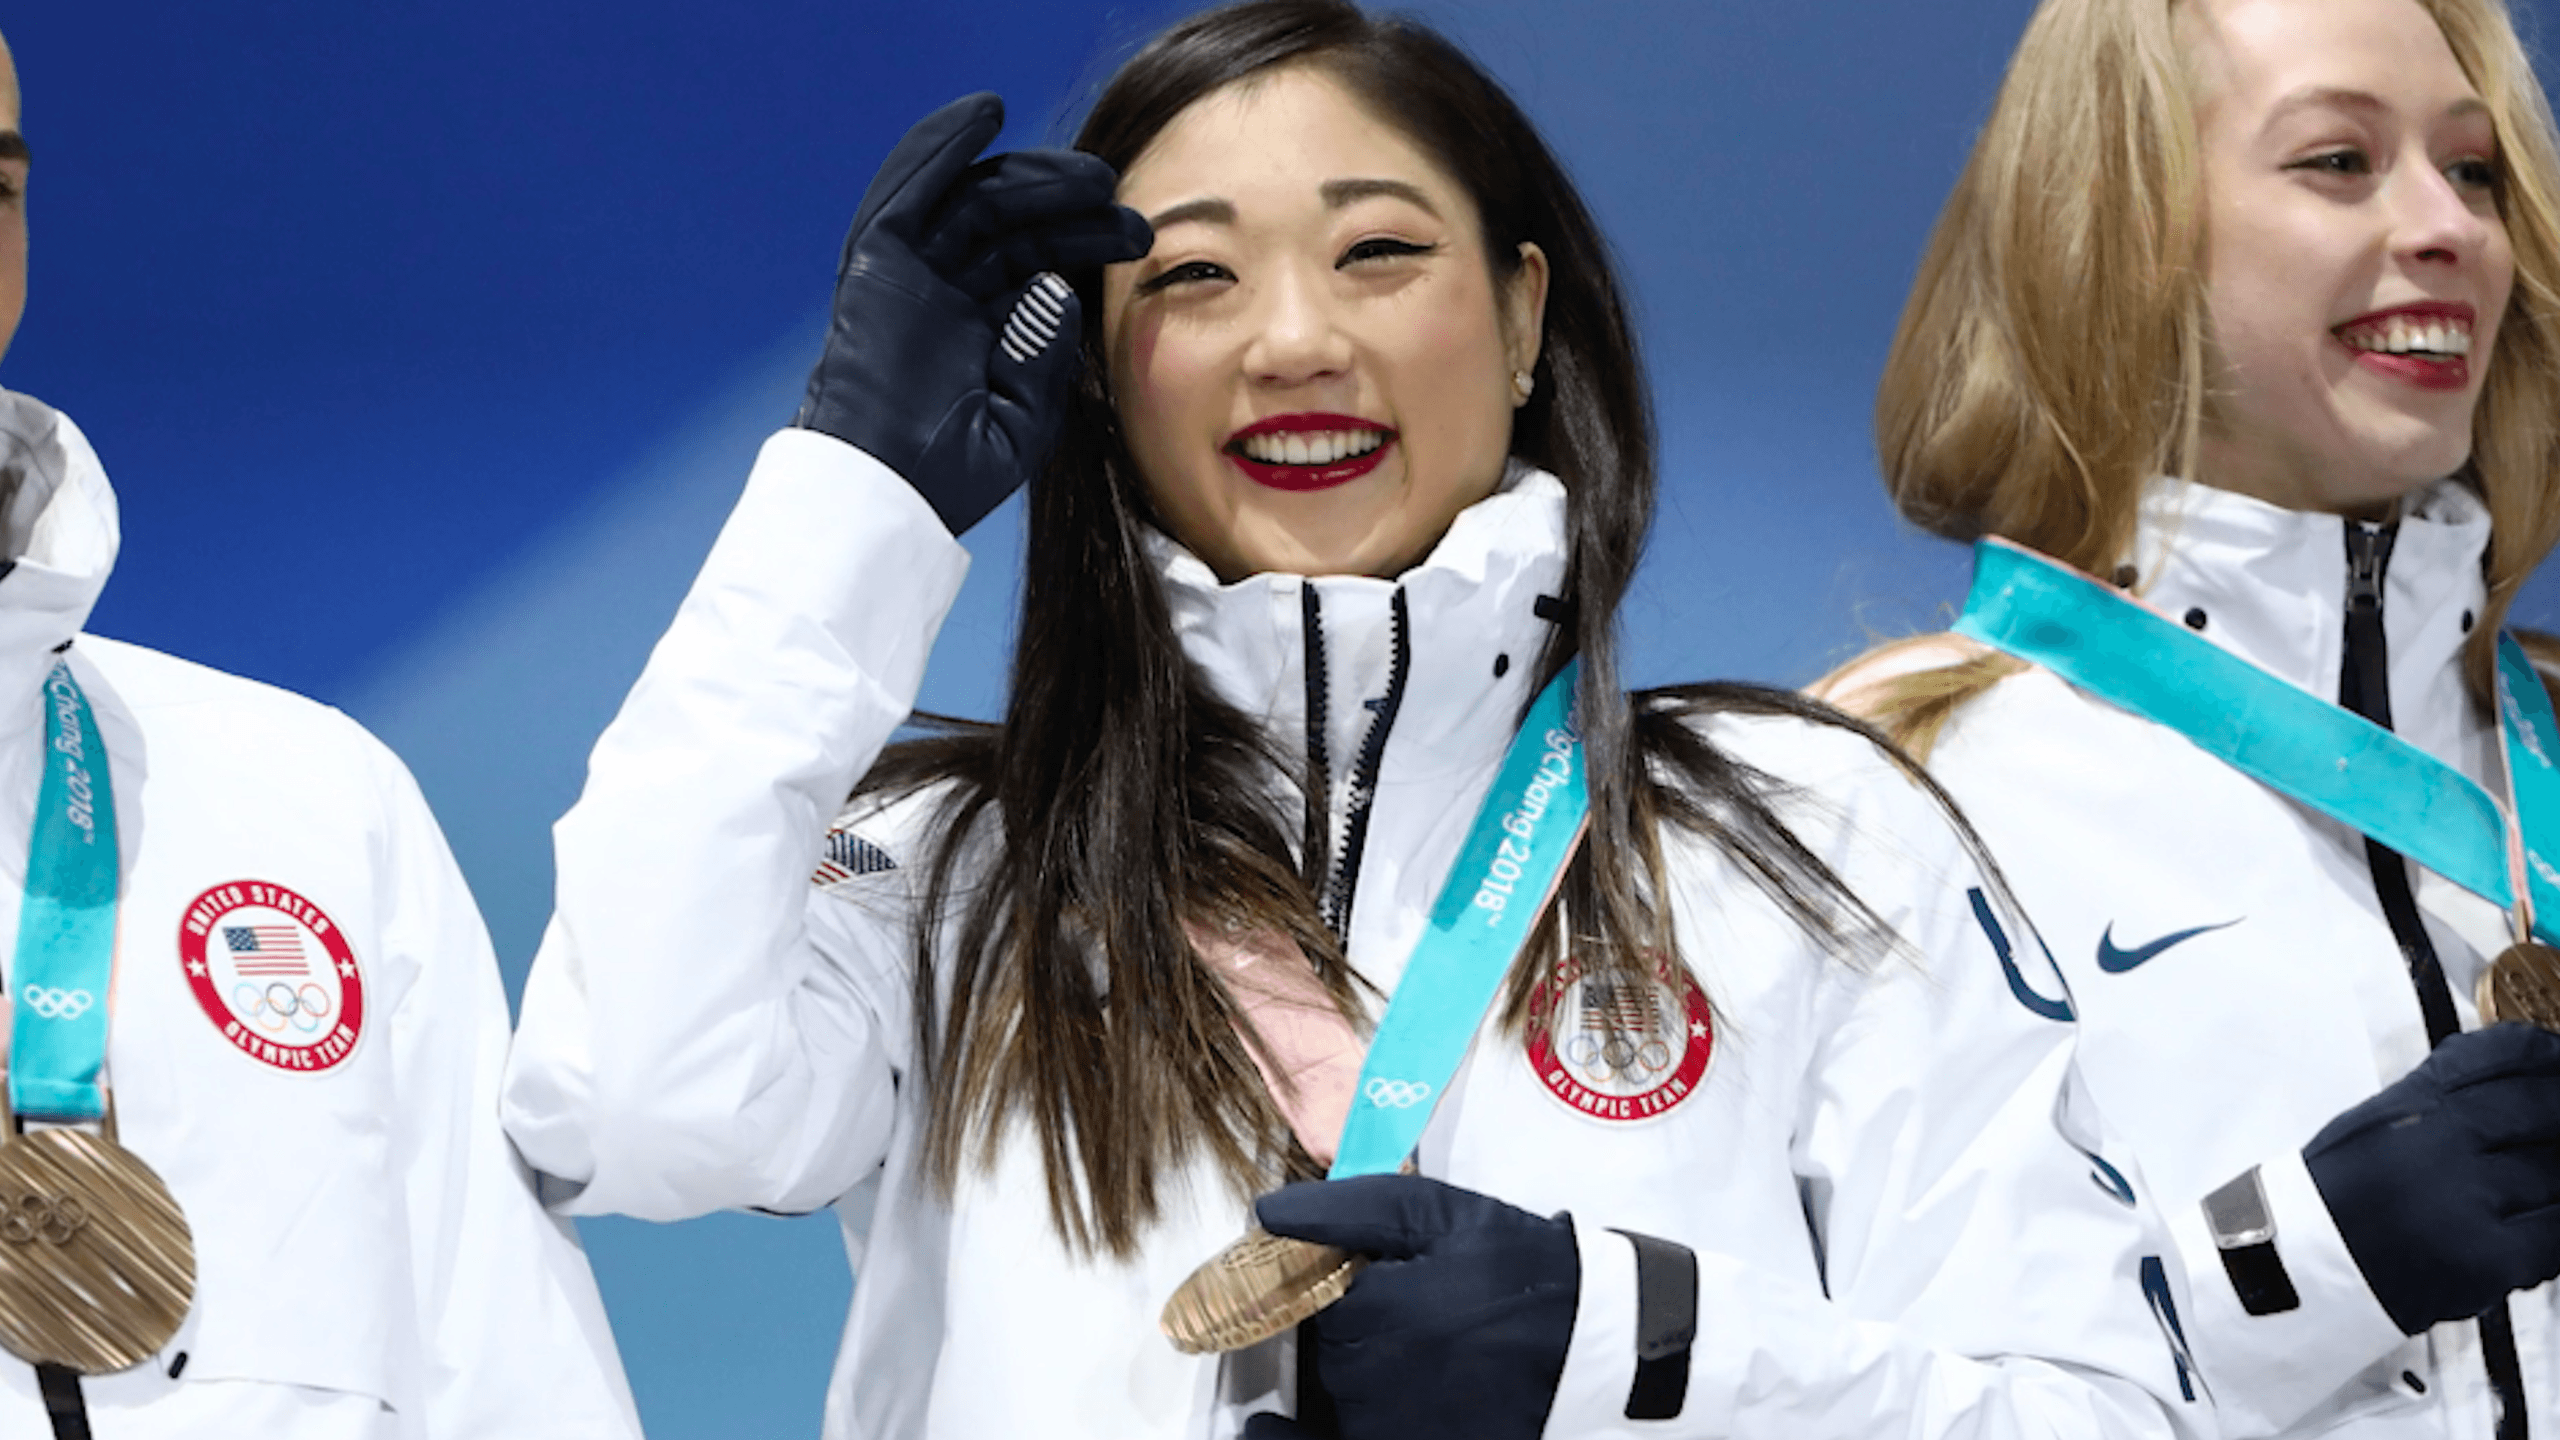 Watch A Pro Figure Skater's Full Makeup & Skin Care Routine